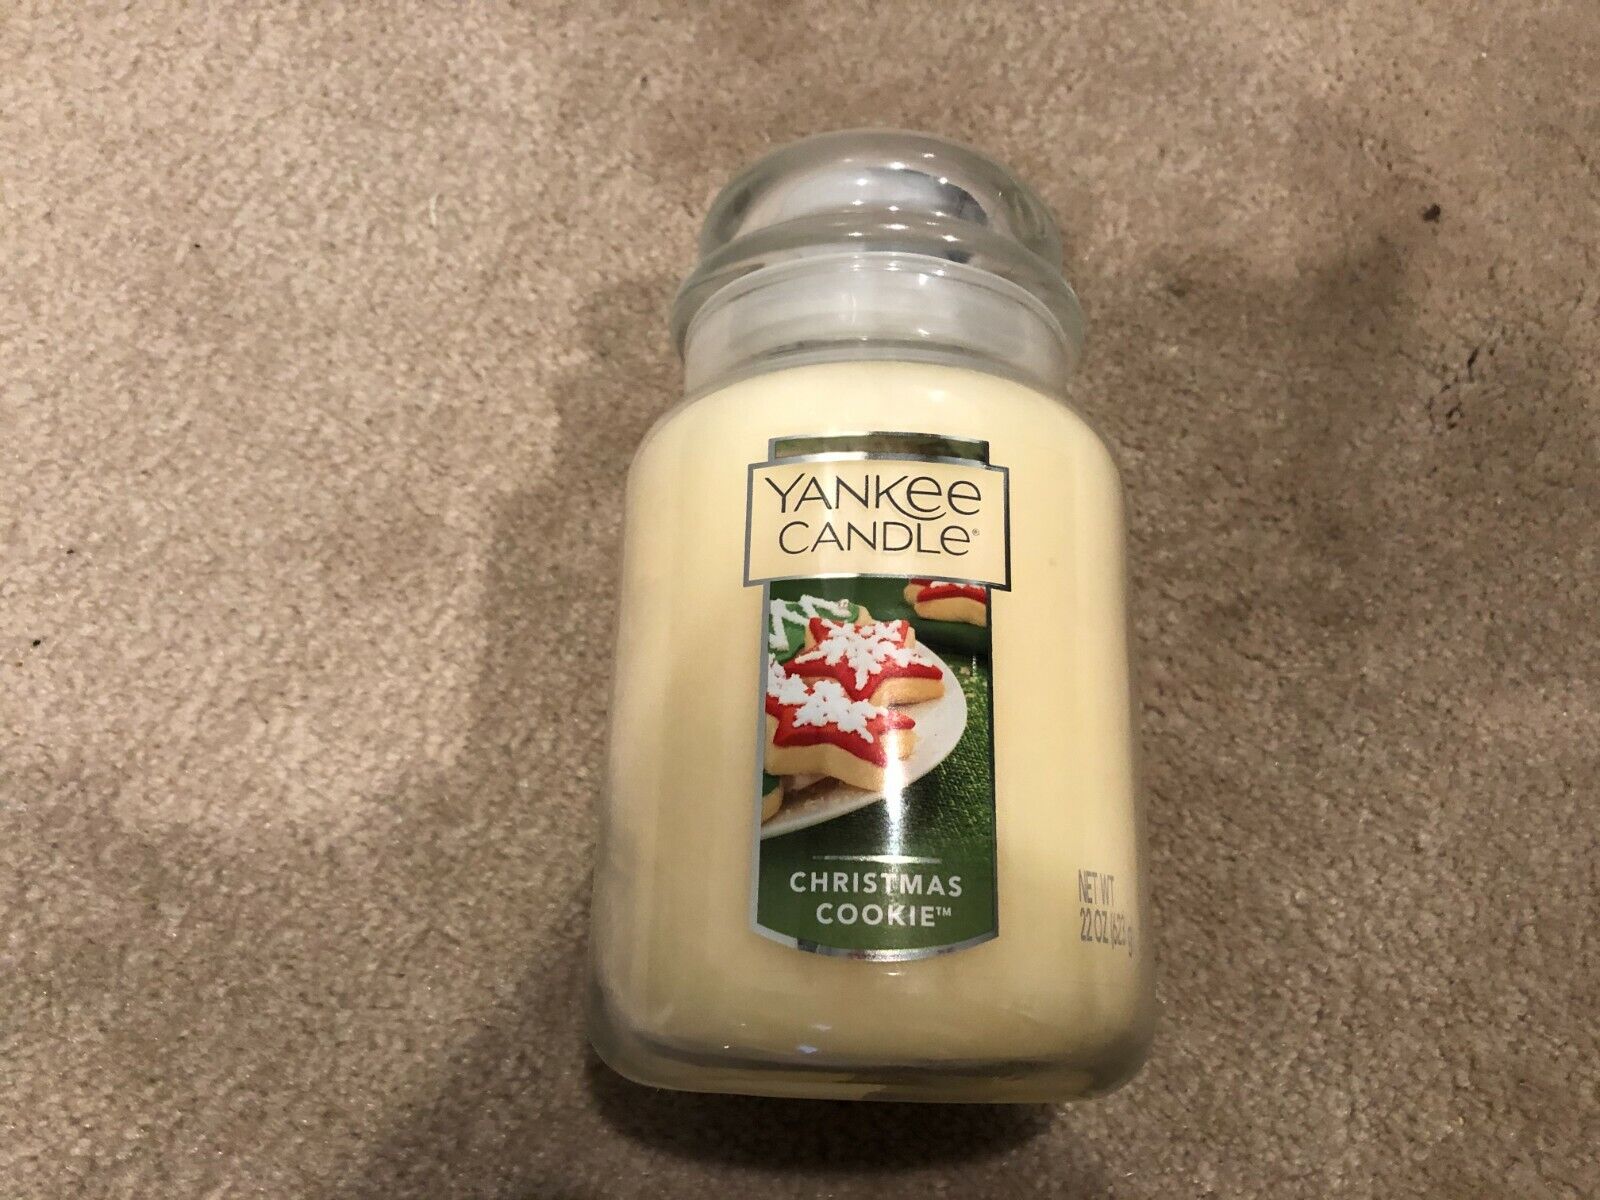 Yankee Candle Christmas Cookie oz. Product Max 64% OFF 22